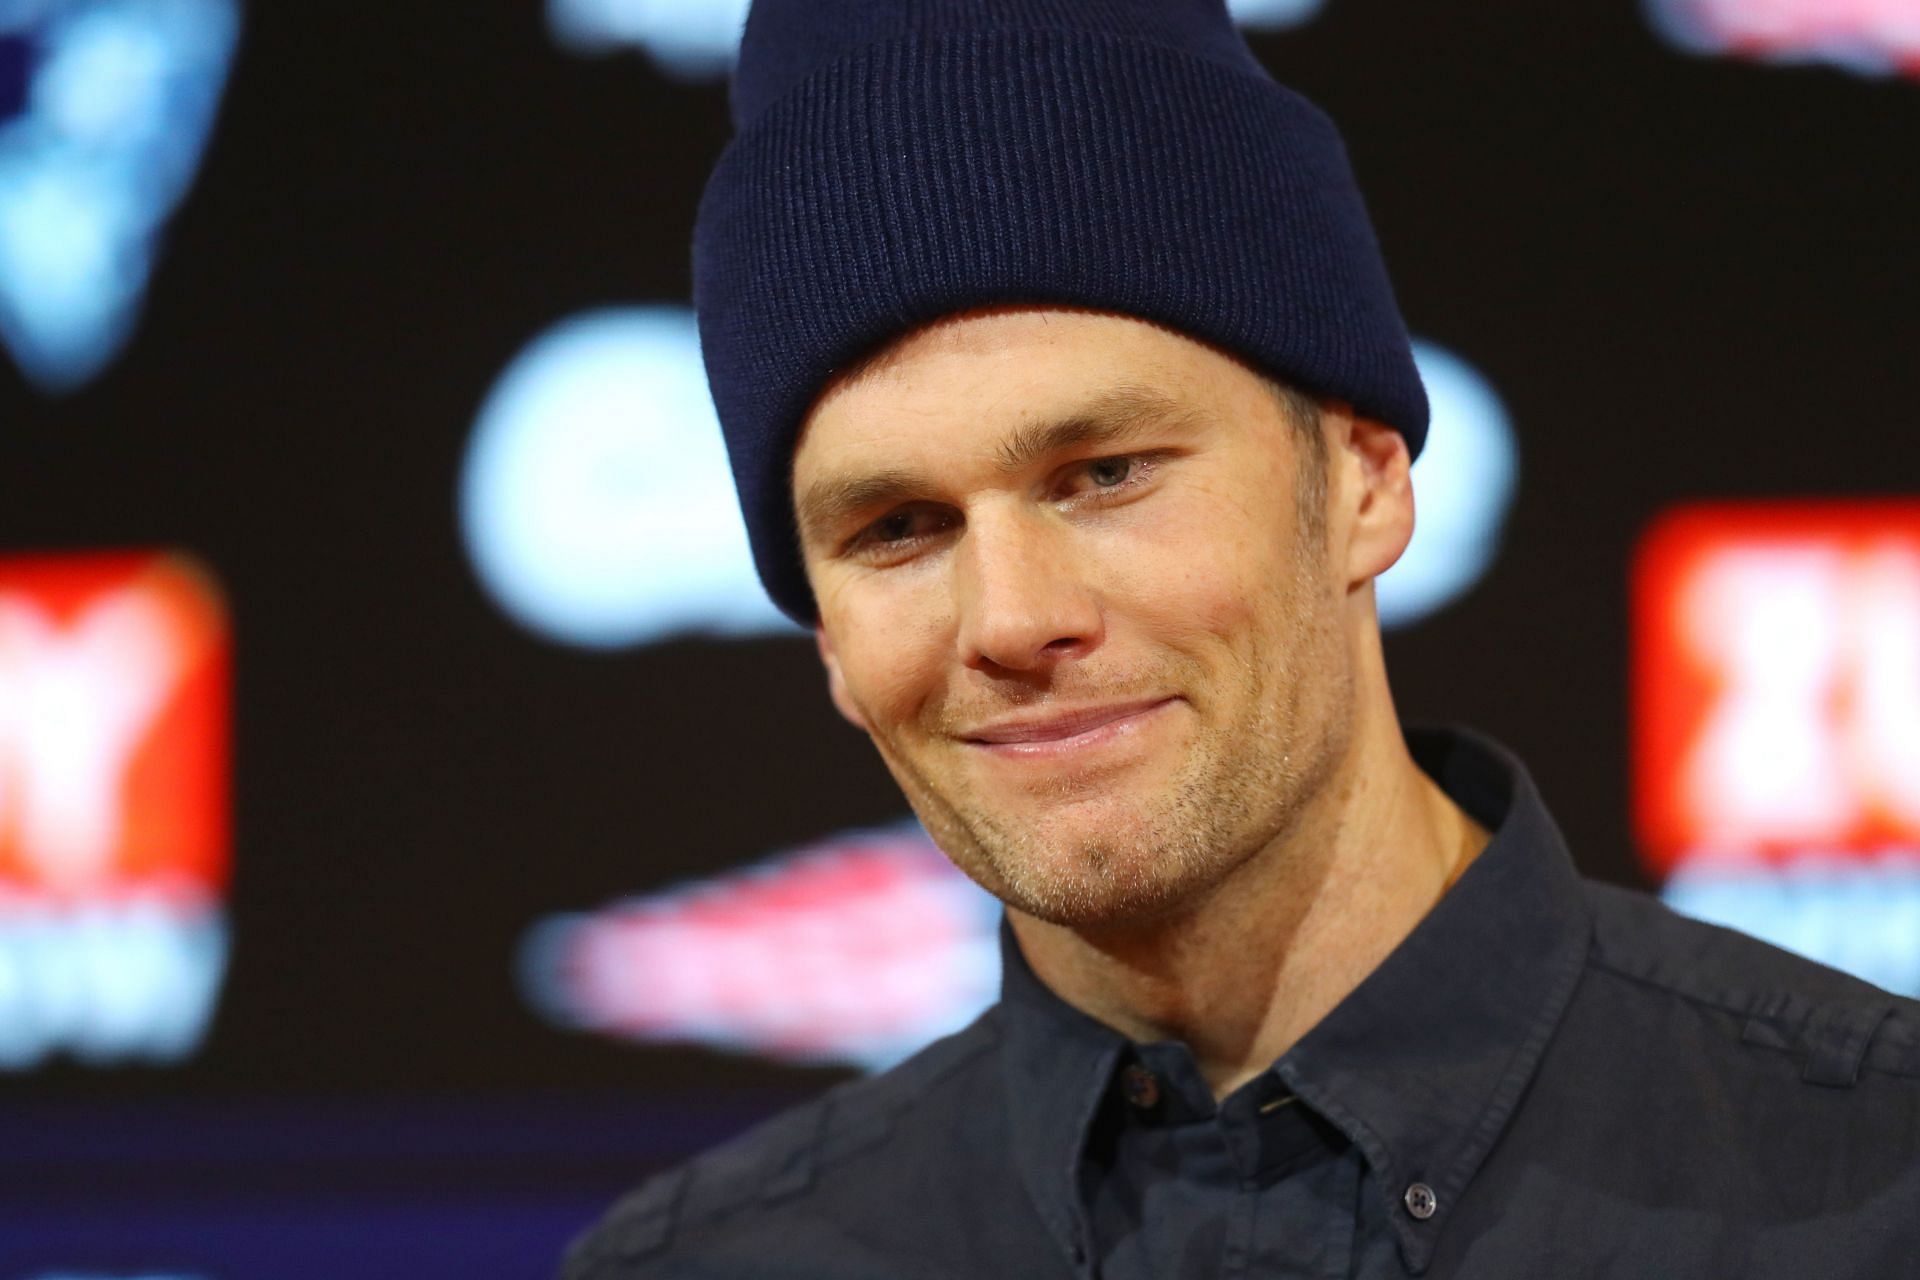 Tom Brady is one of the higehst-earning NFL players ever